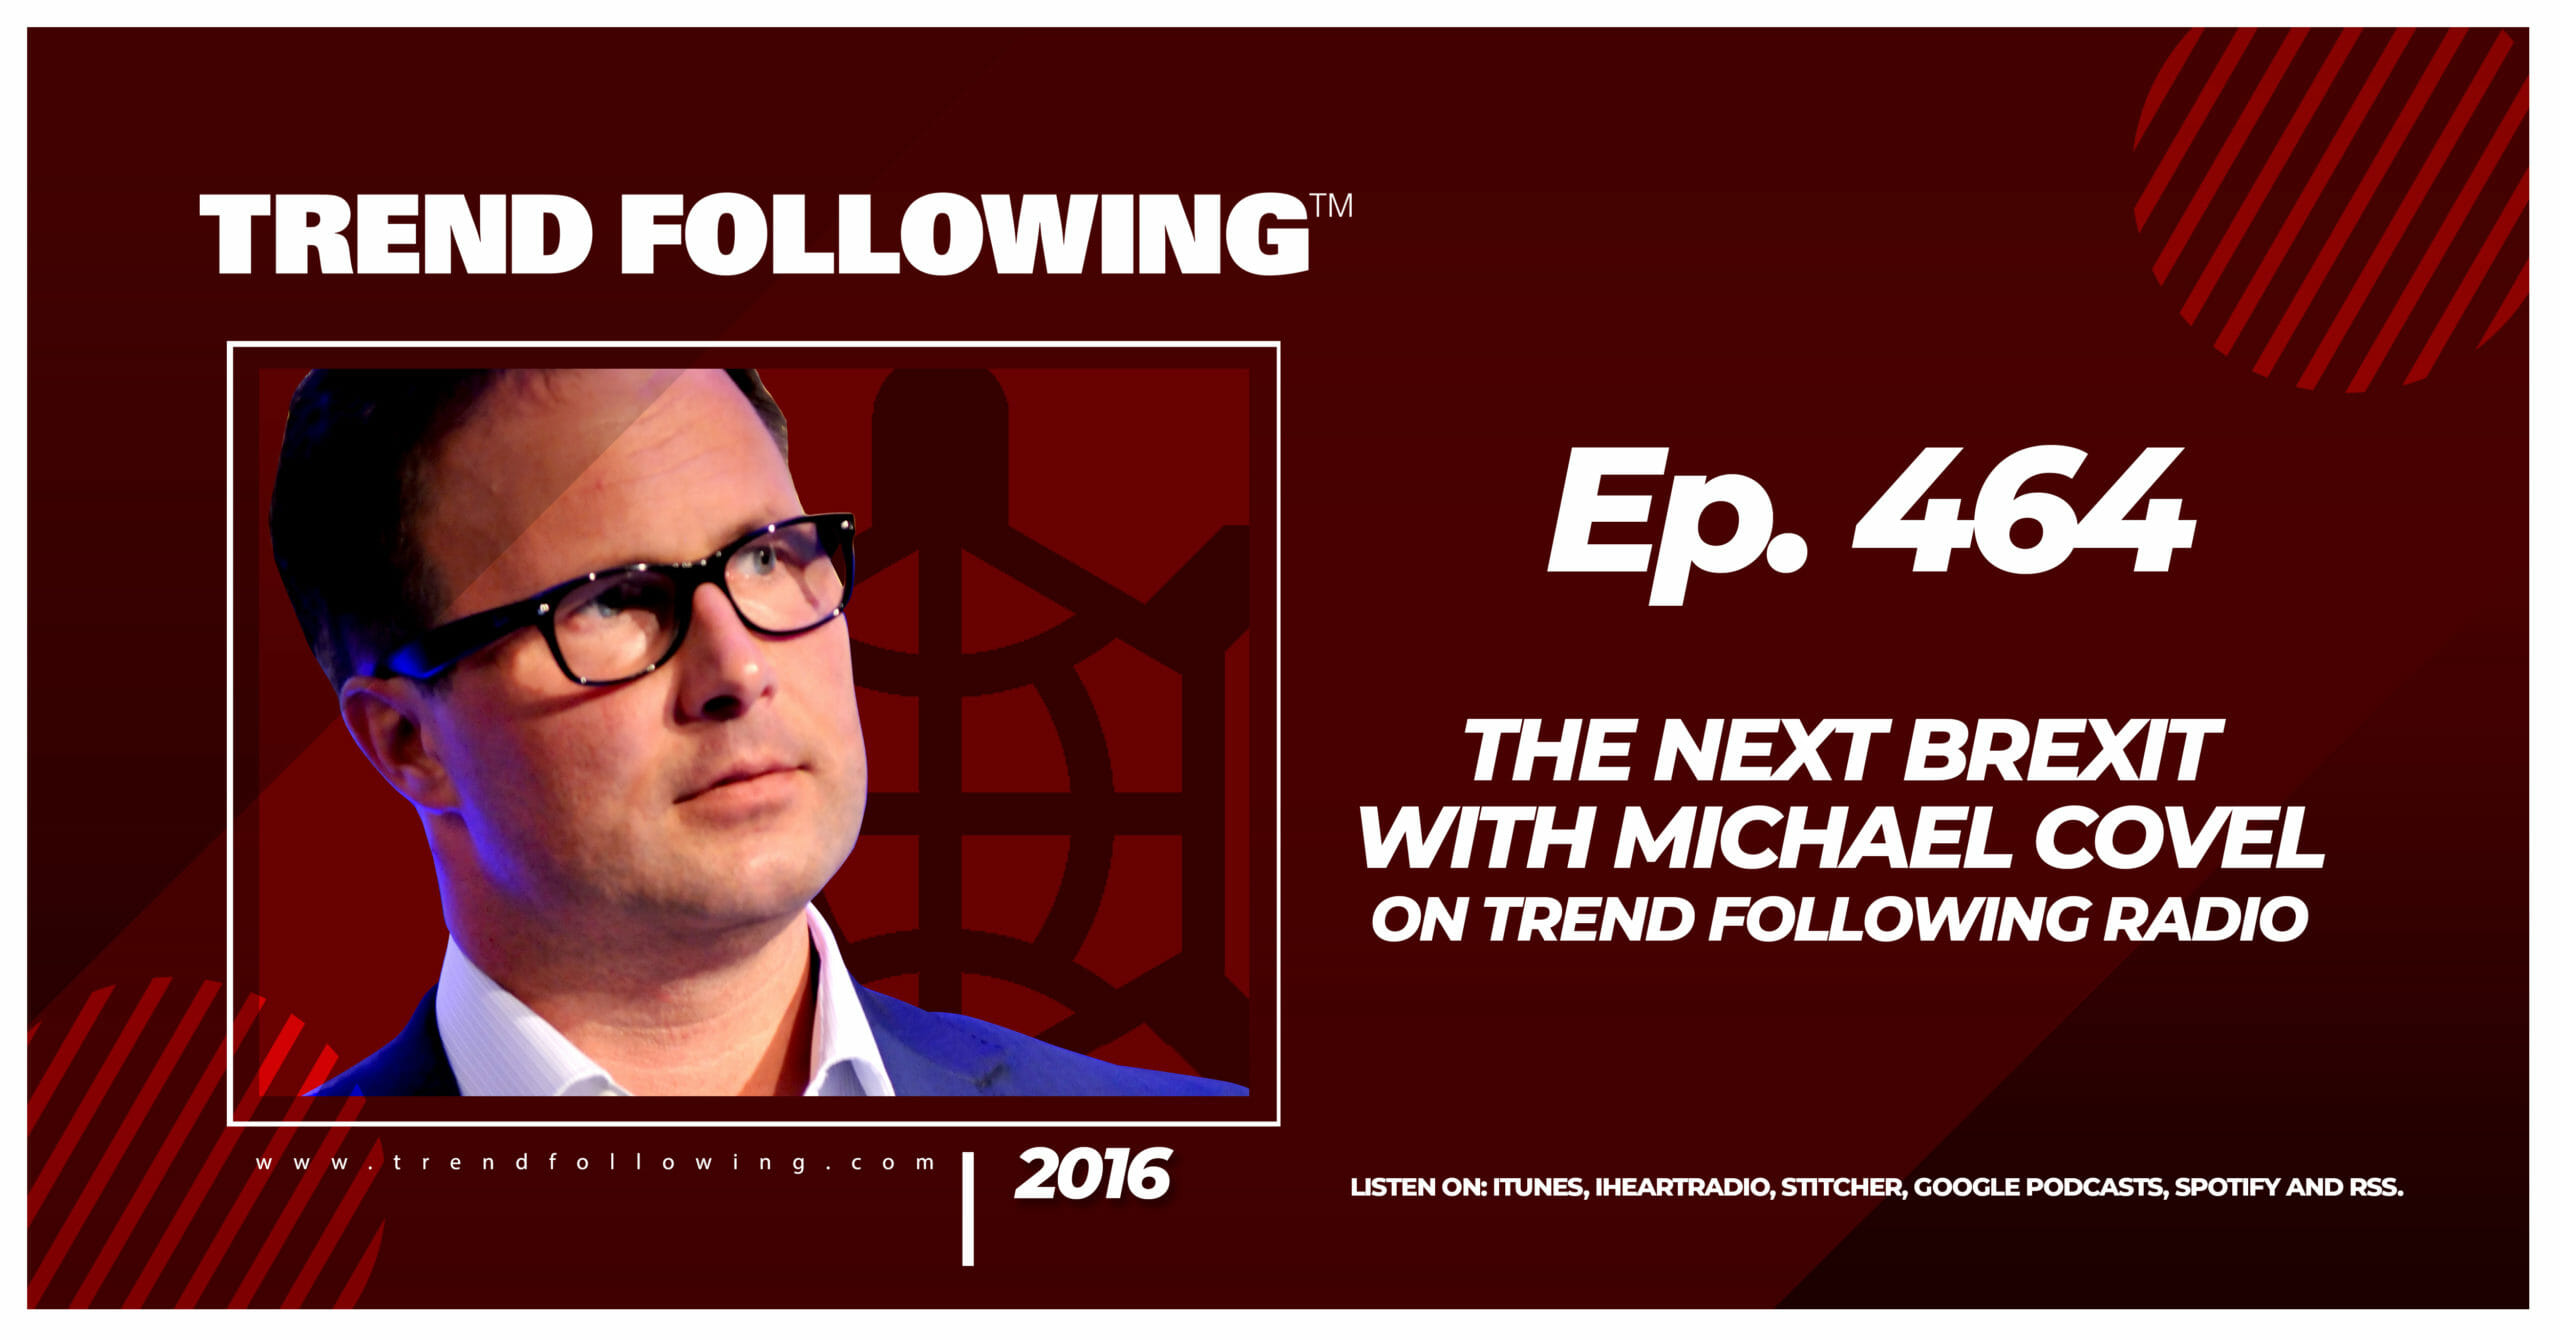 The Next Brexit with Michael Covel on Trend Following Radio